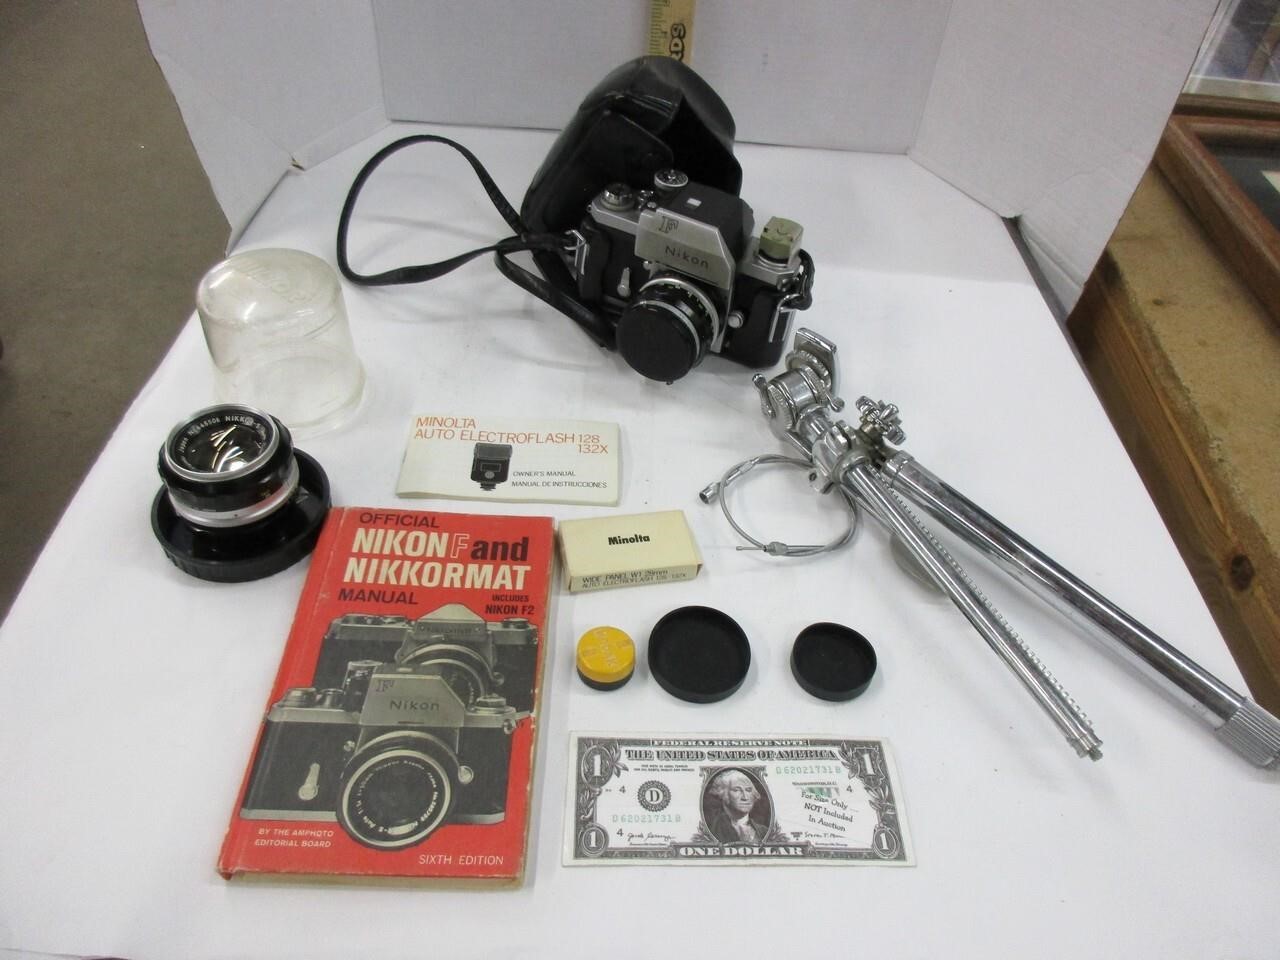 Nikon 35 mm camera and accessories, Untested